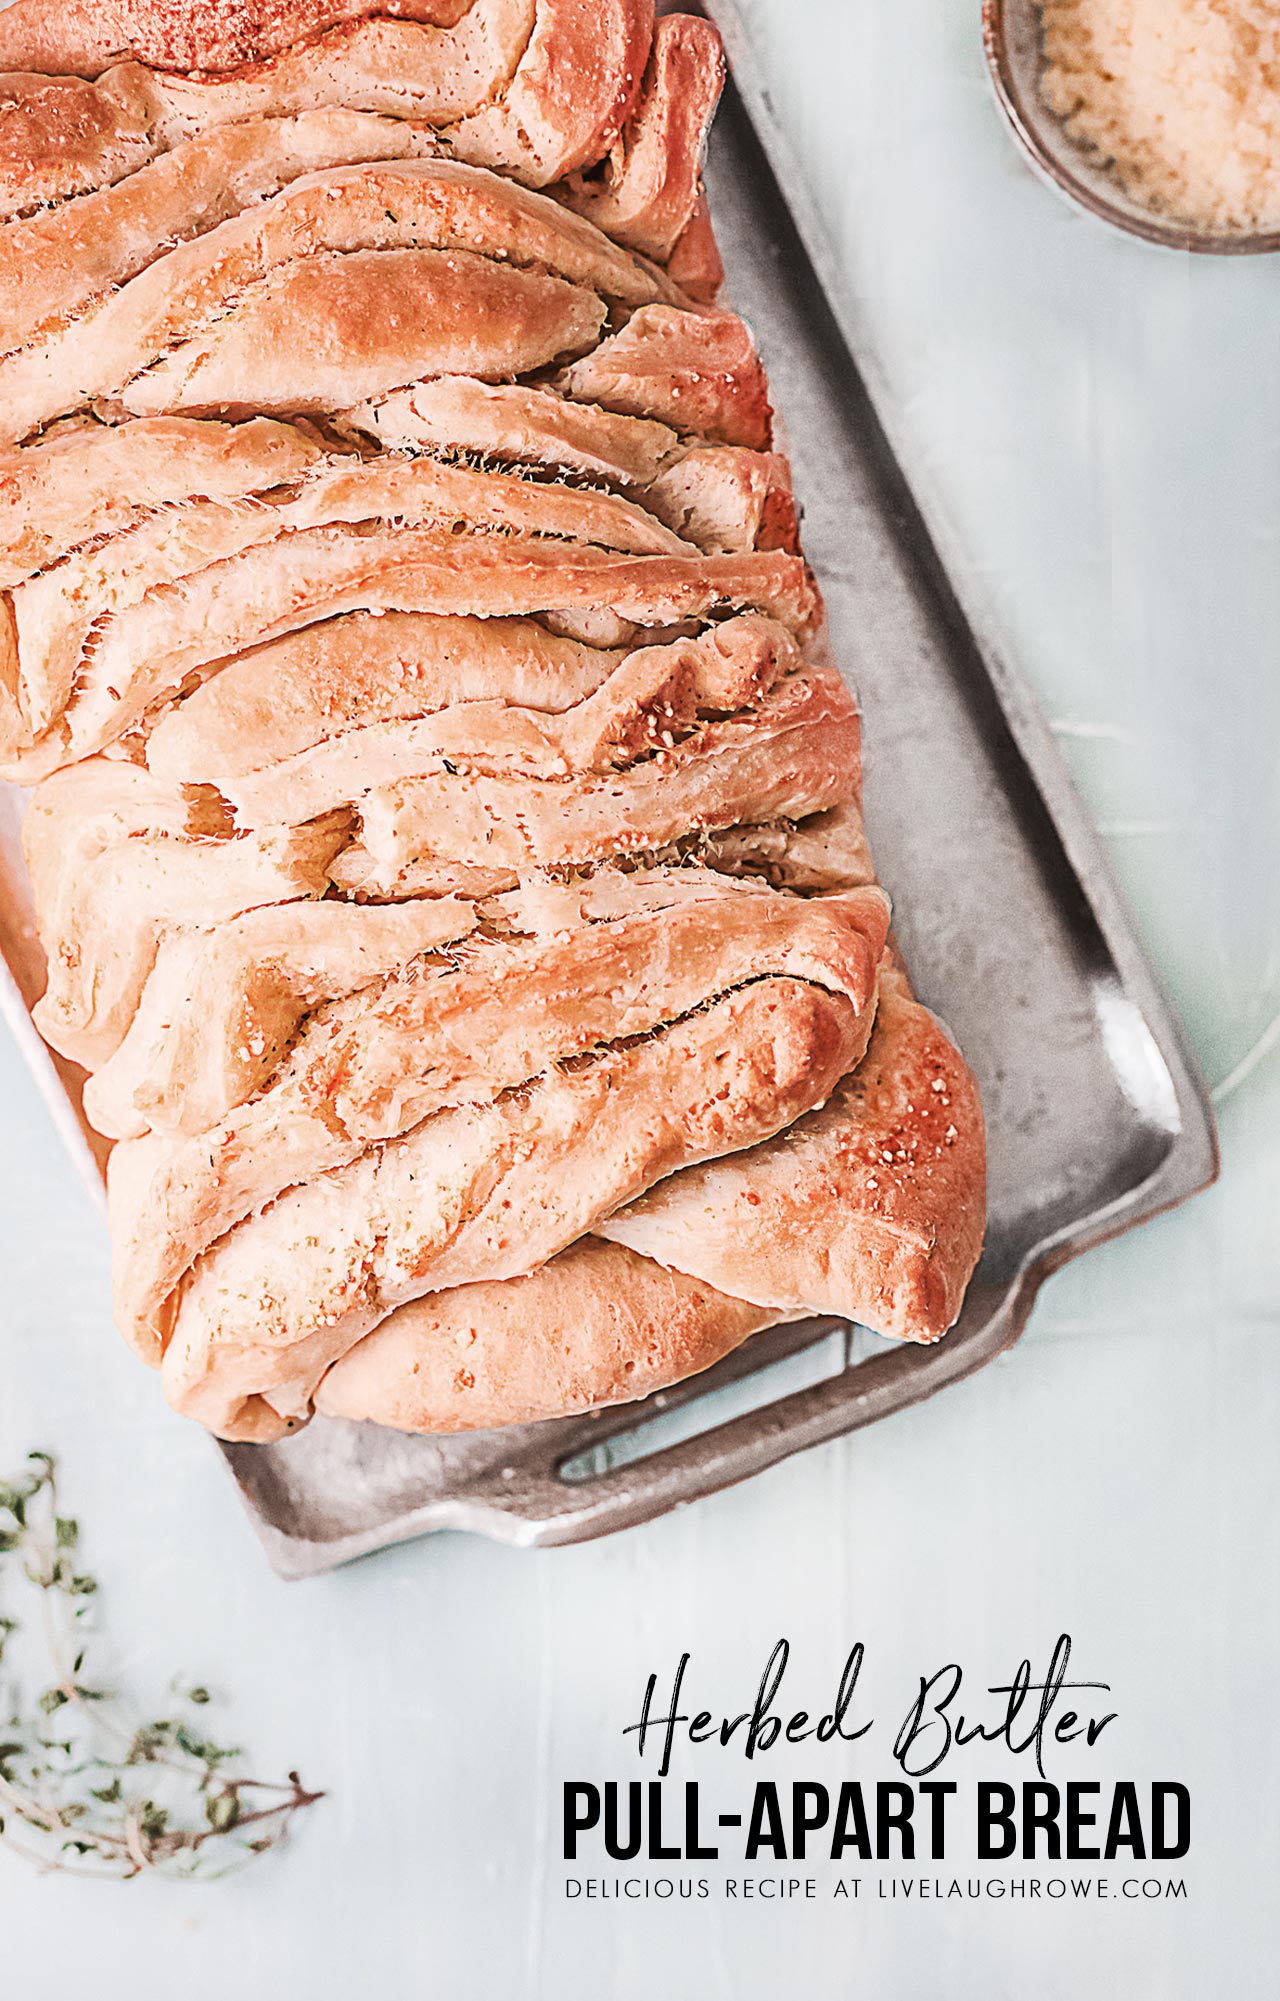 Herbed Butter Pull-Apart Bread Recipe